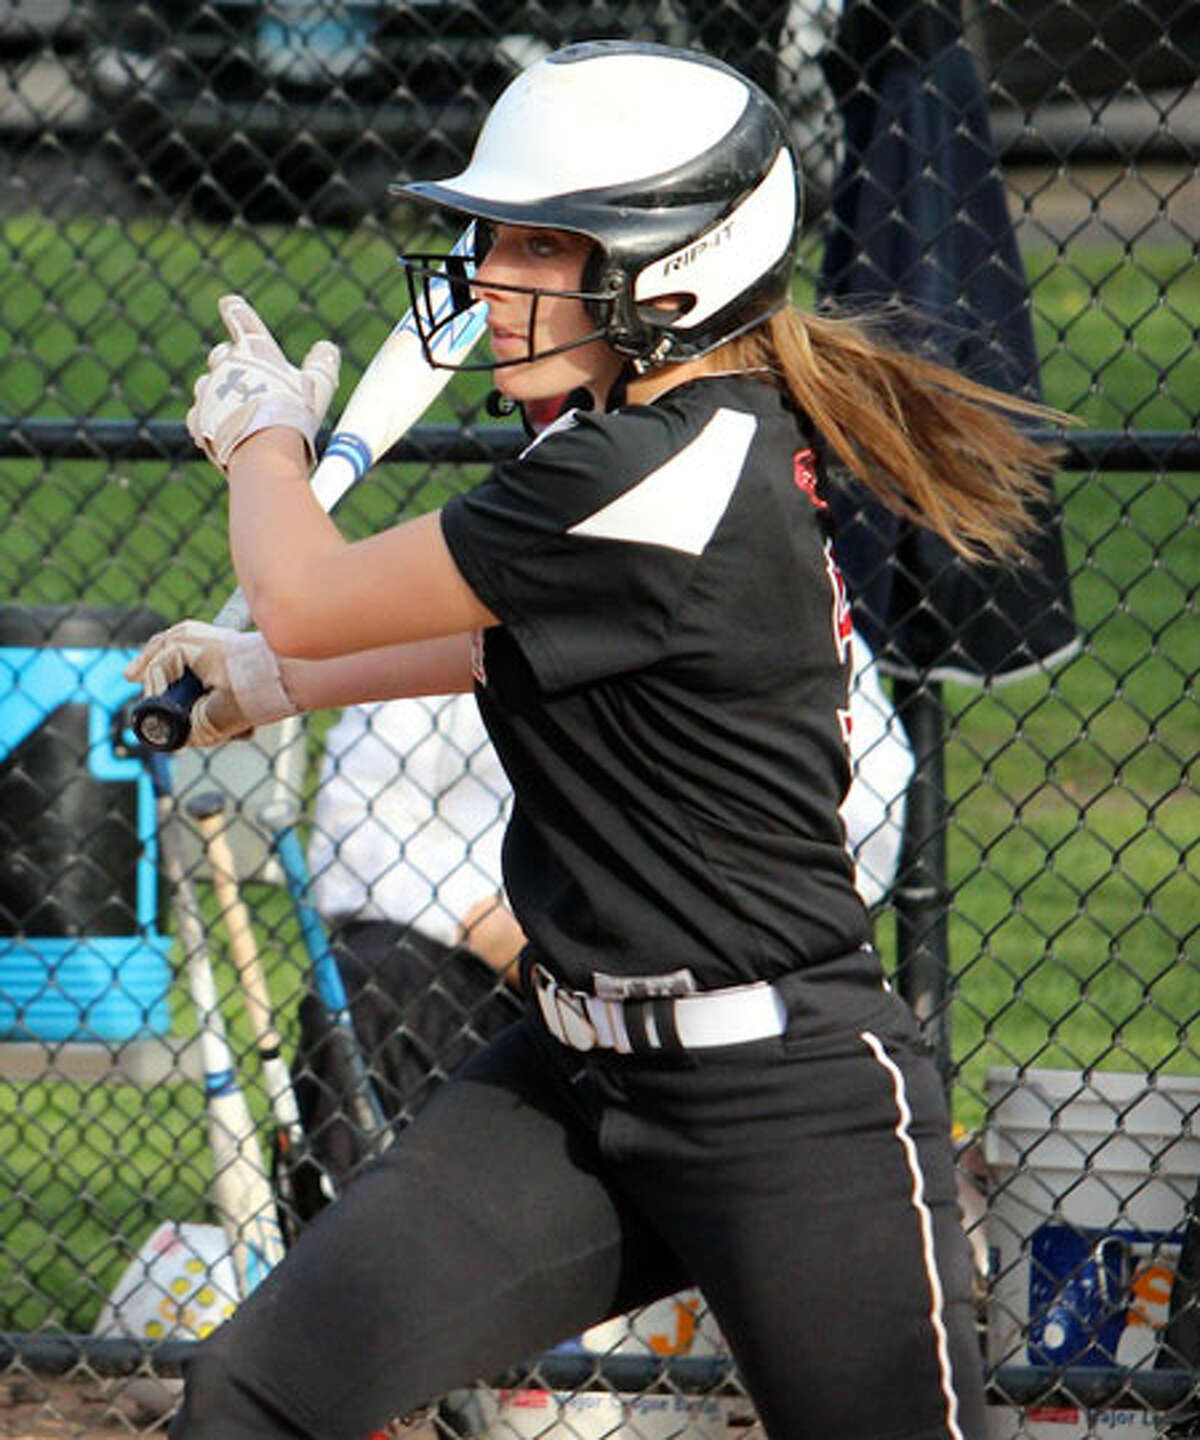 Gillian Kane raps out a hit during Friday's game in Waveny Park. — Terry Dinan photo